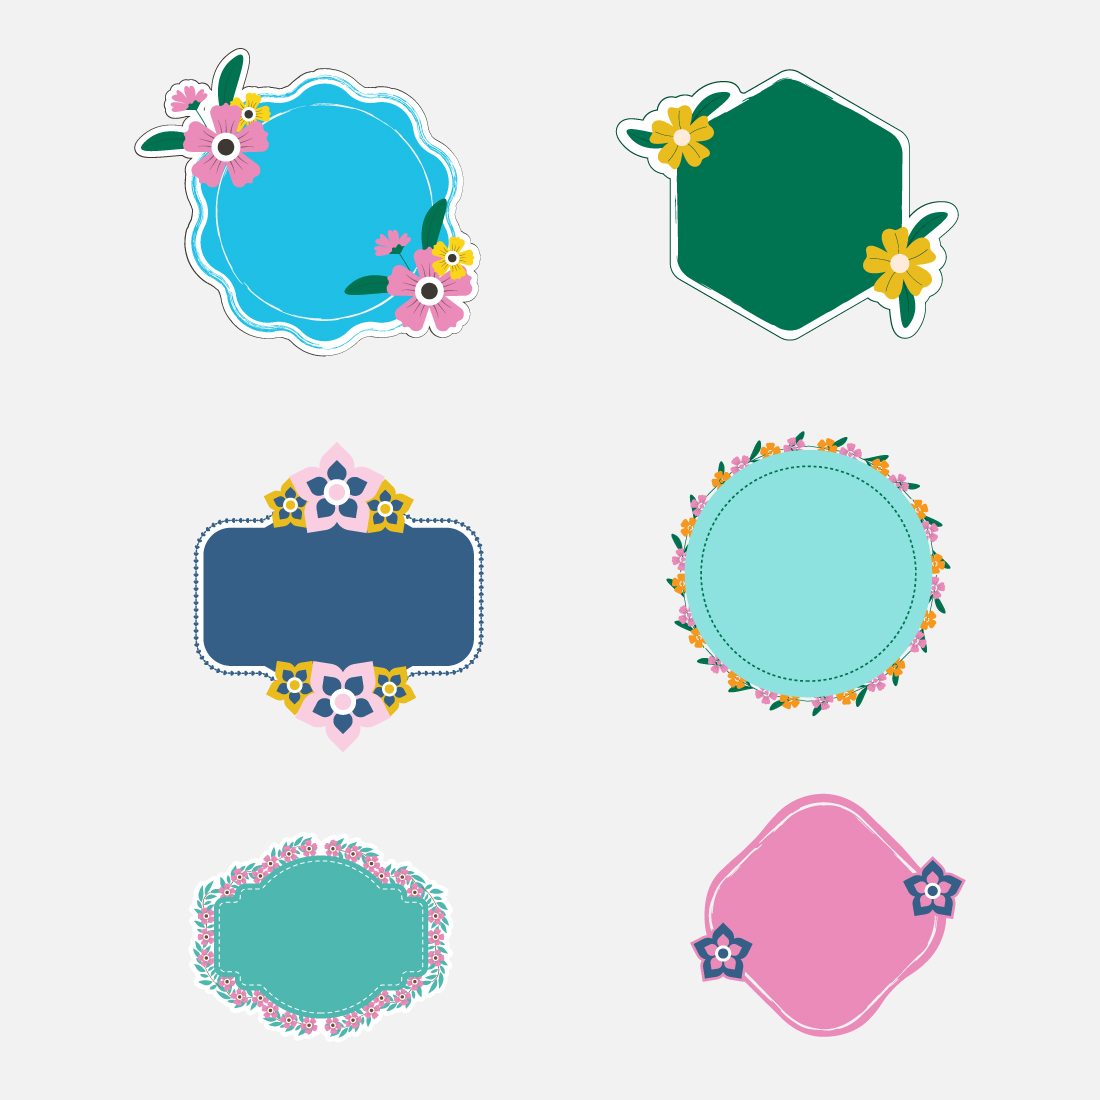 Simple Badge with Flower Stickers or Labels Vectors cover image.